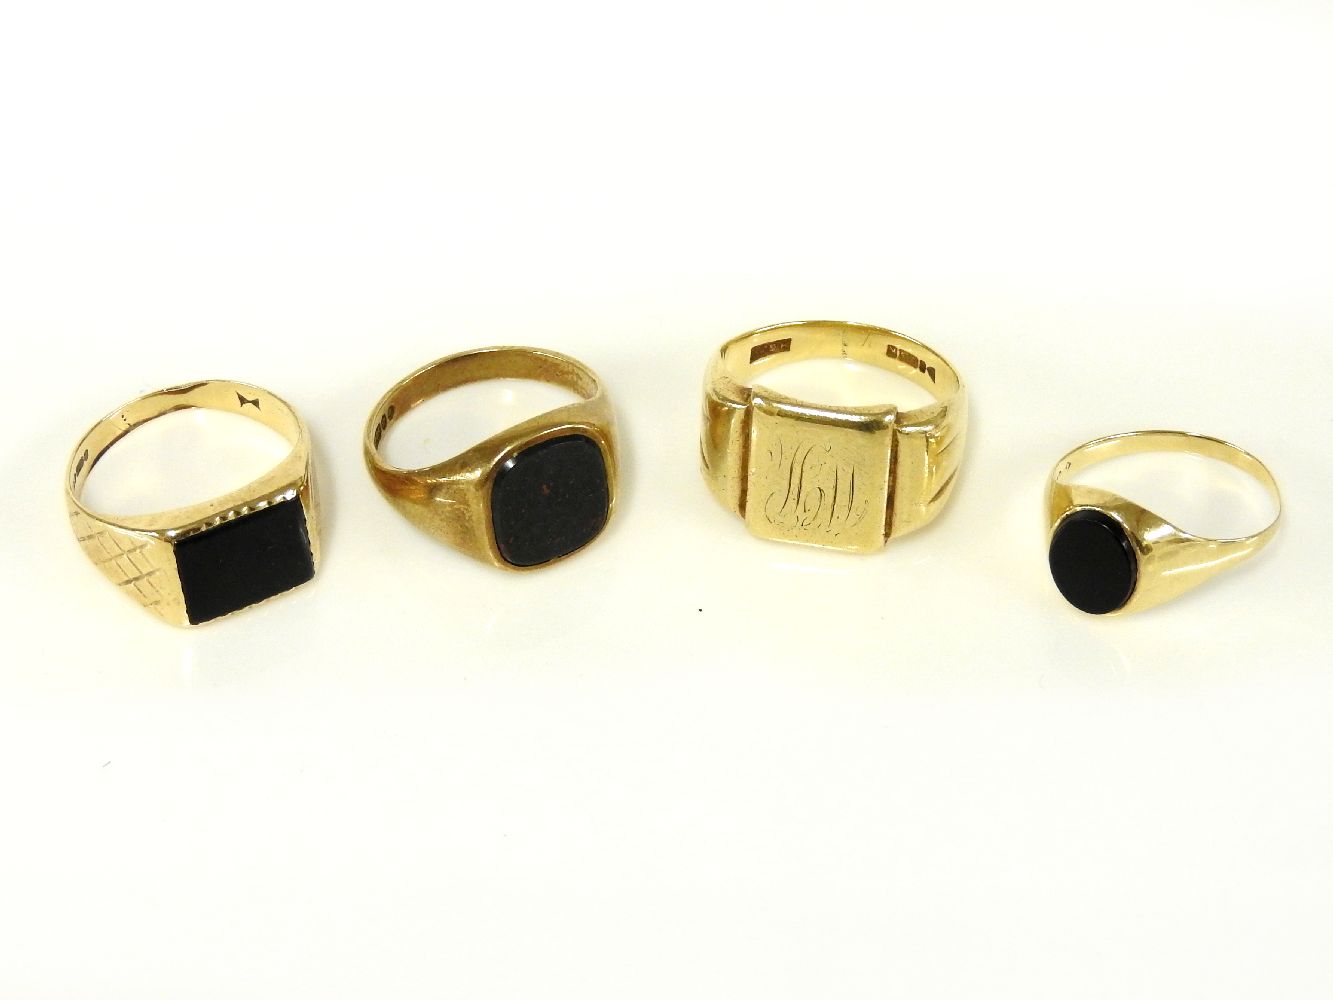 A 9ct gold bloodstone signet ring, a 9ct gold oval onyx signet ring, a 9ct gold rectangular onyx